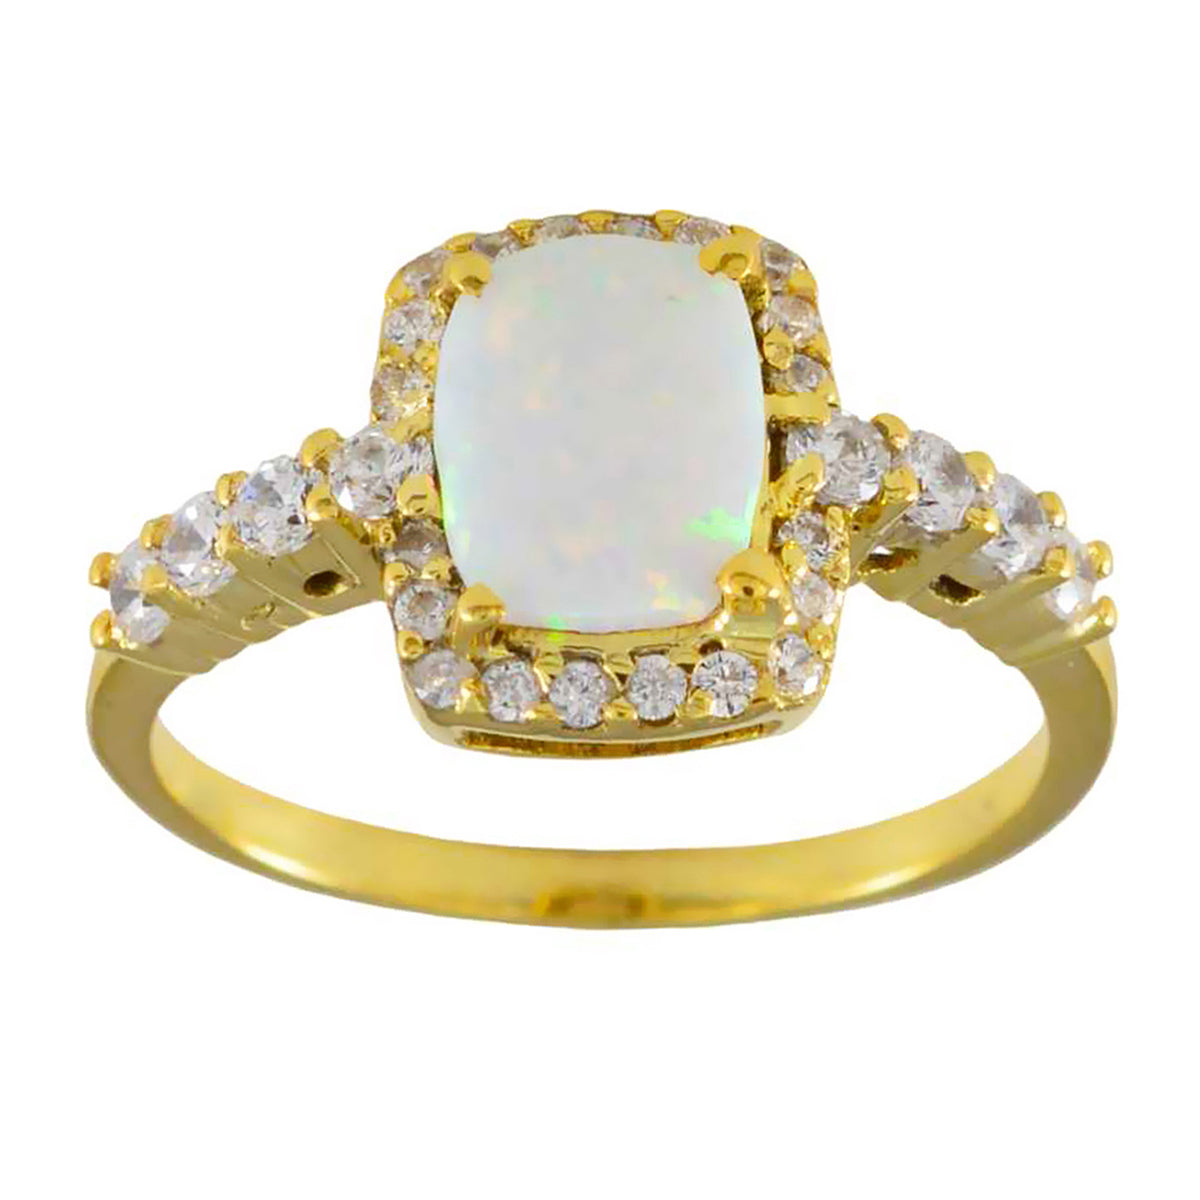 Riyo Prime Silver Ring With Yellow Gold Plating Opal CZ Stone Octagon Shape Prong Setting Antique Jewelry Birthday Ring